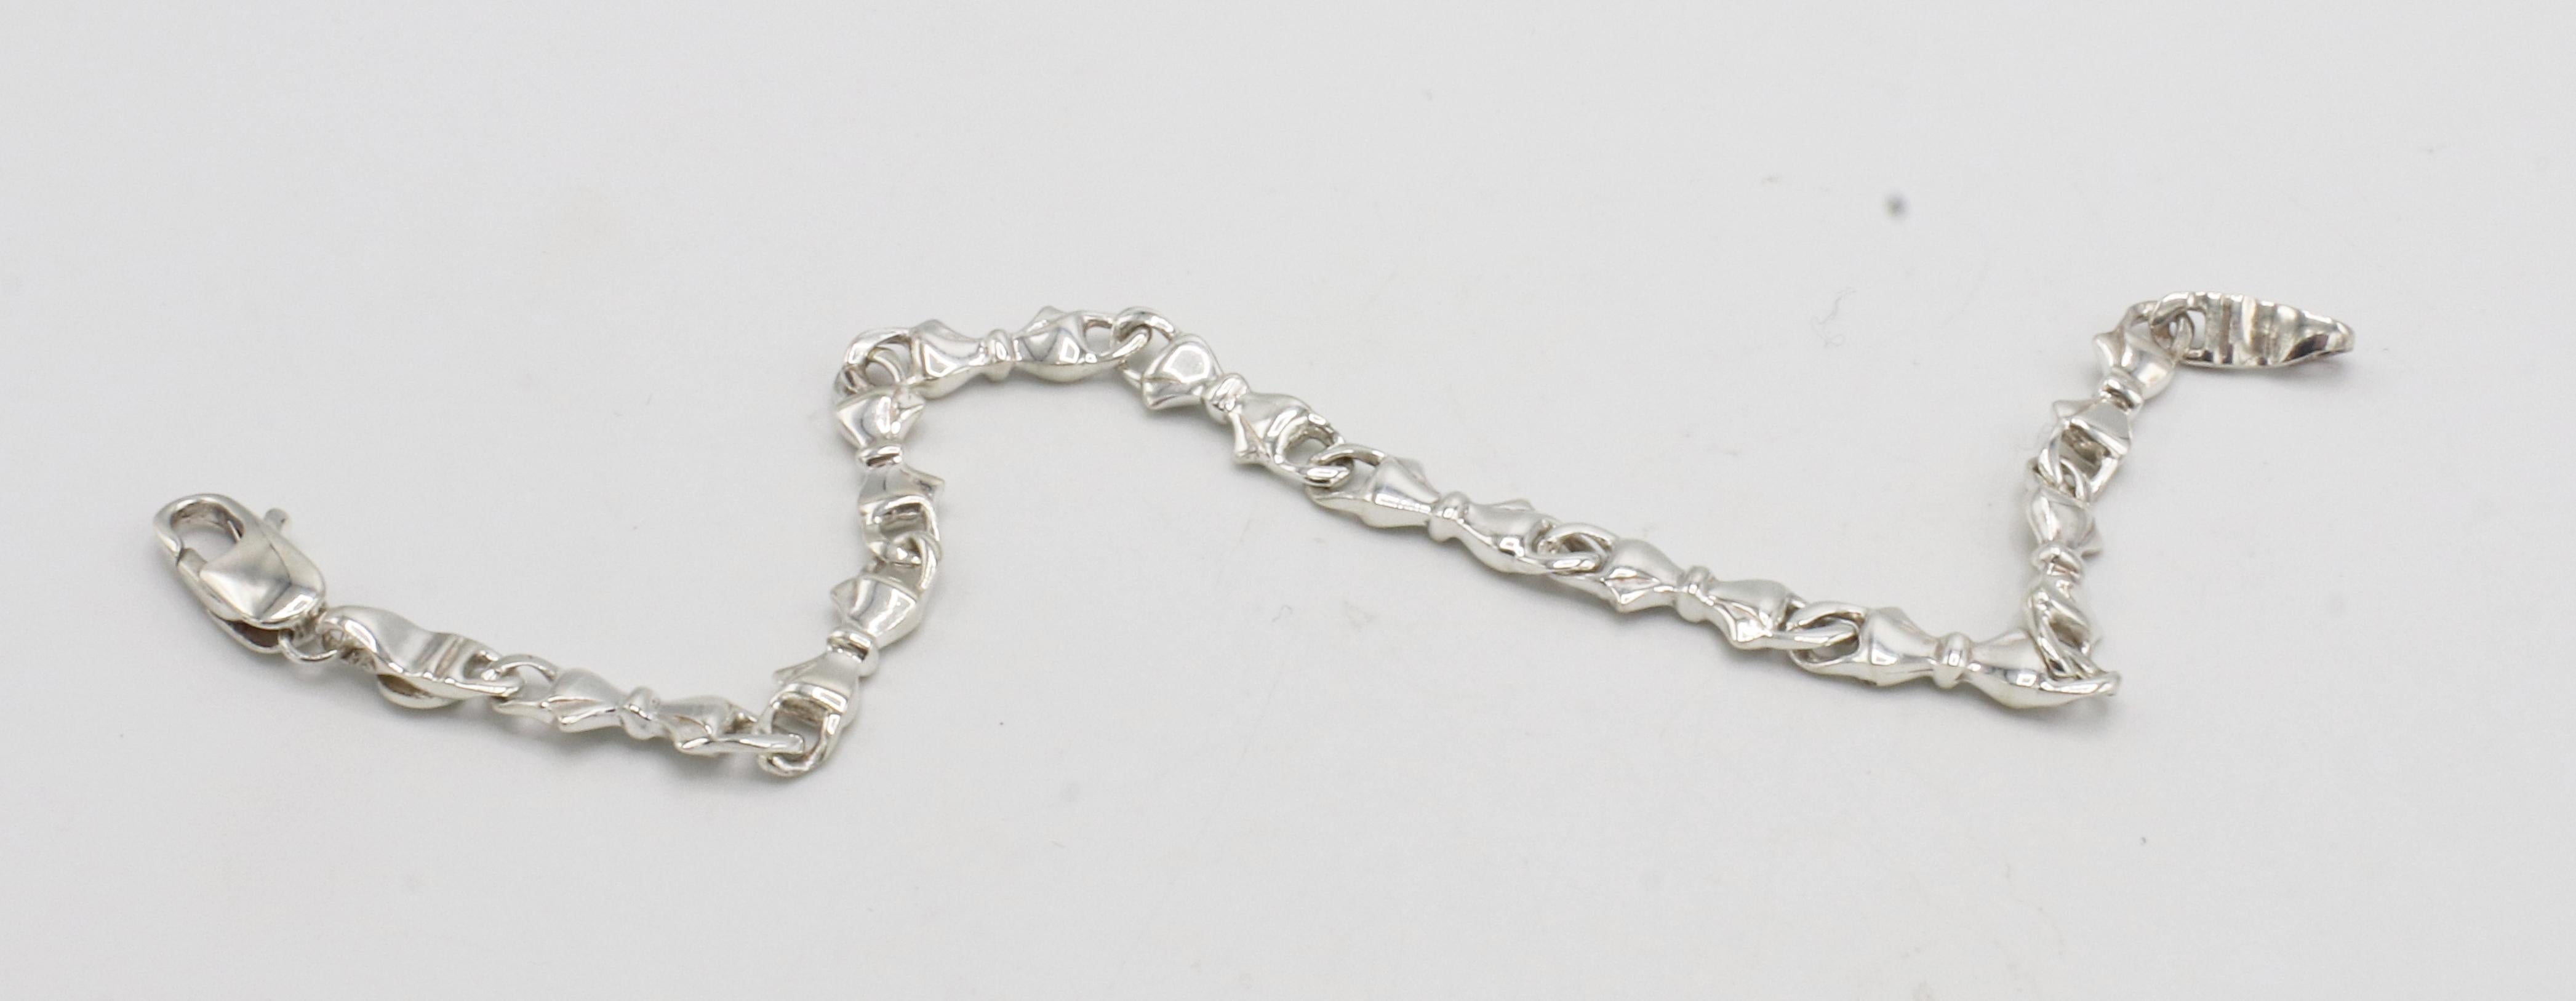 Tiffany & Co. Sterling Silver Bow Link Bracelet 
Metal: Sterling silver
Weight: 9.68 grams
Length: 7.5 inches
Width: 5mm
Signed: T&Co. 925
